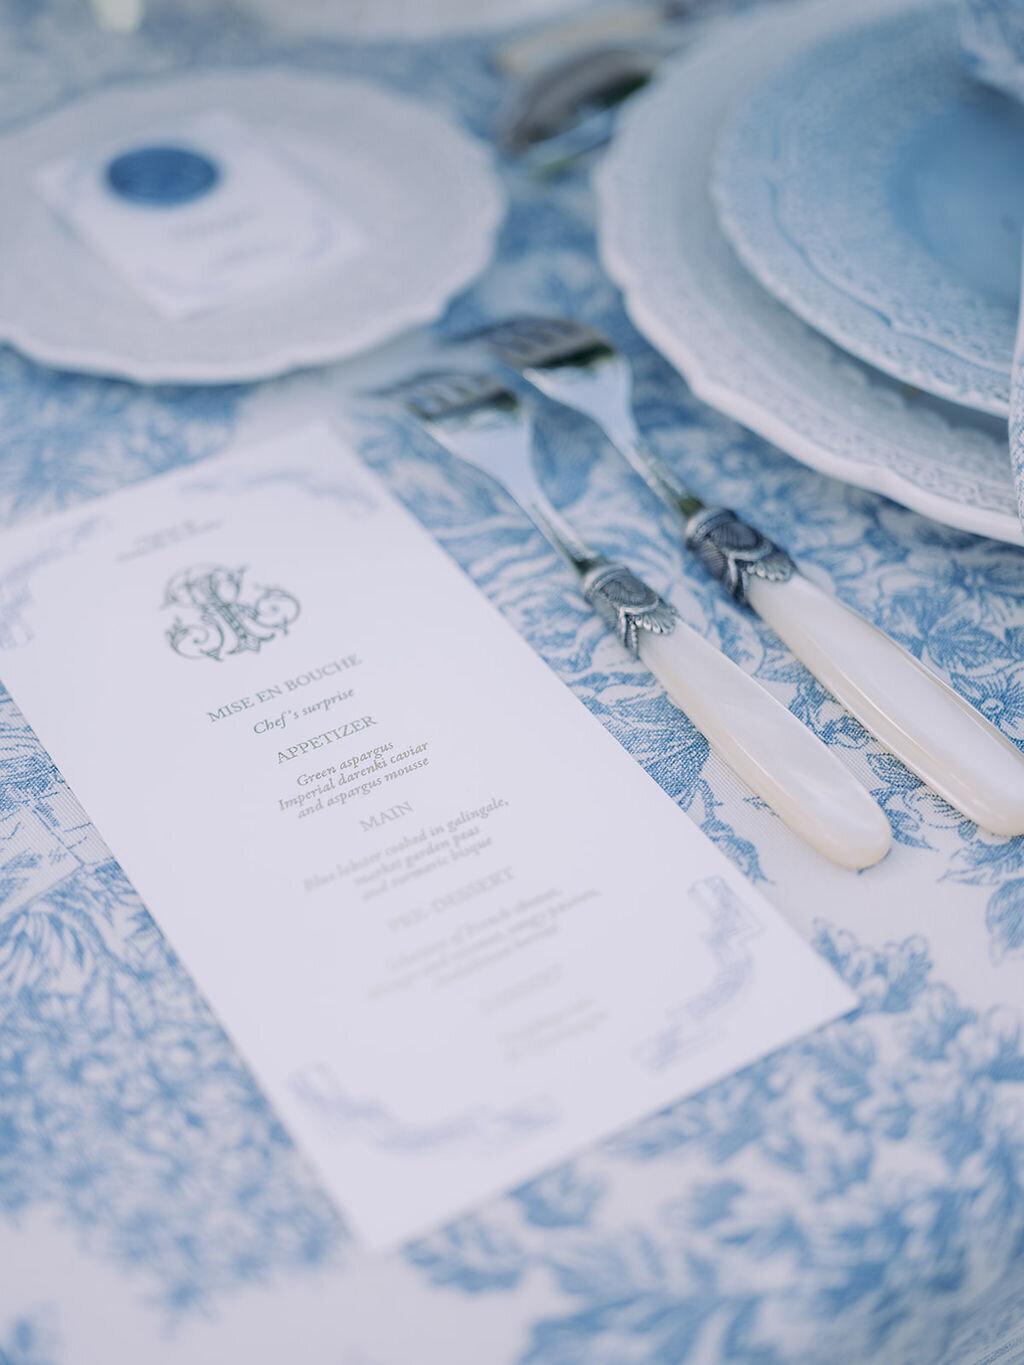 Wedding Reception table in shades of blue